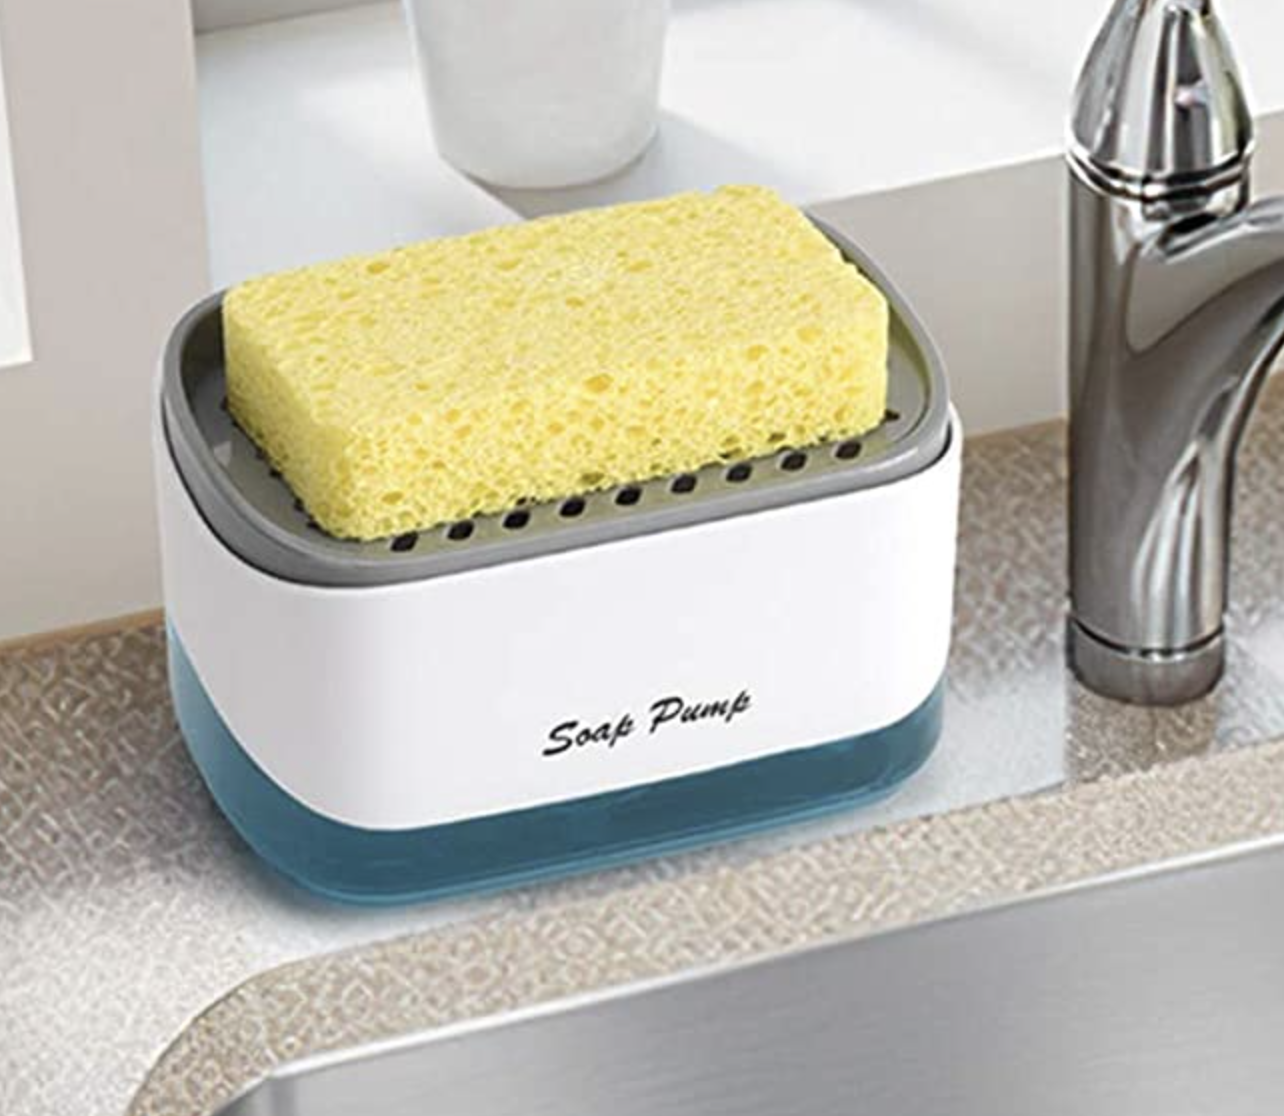 the soap dispenser with a sponge on it next to a kitchen sink